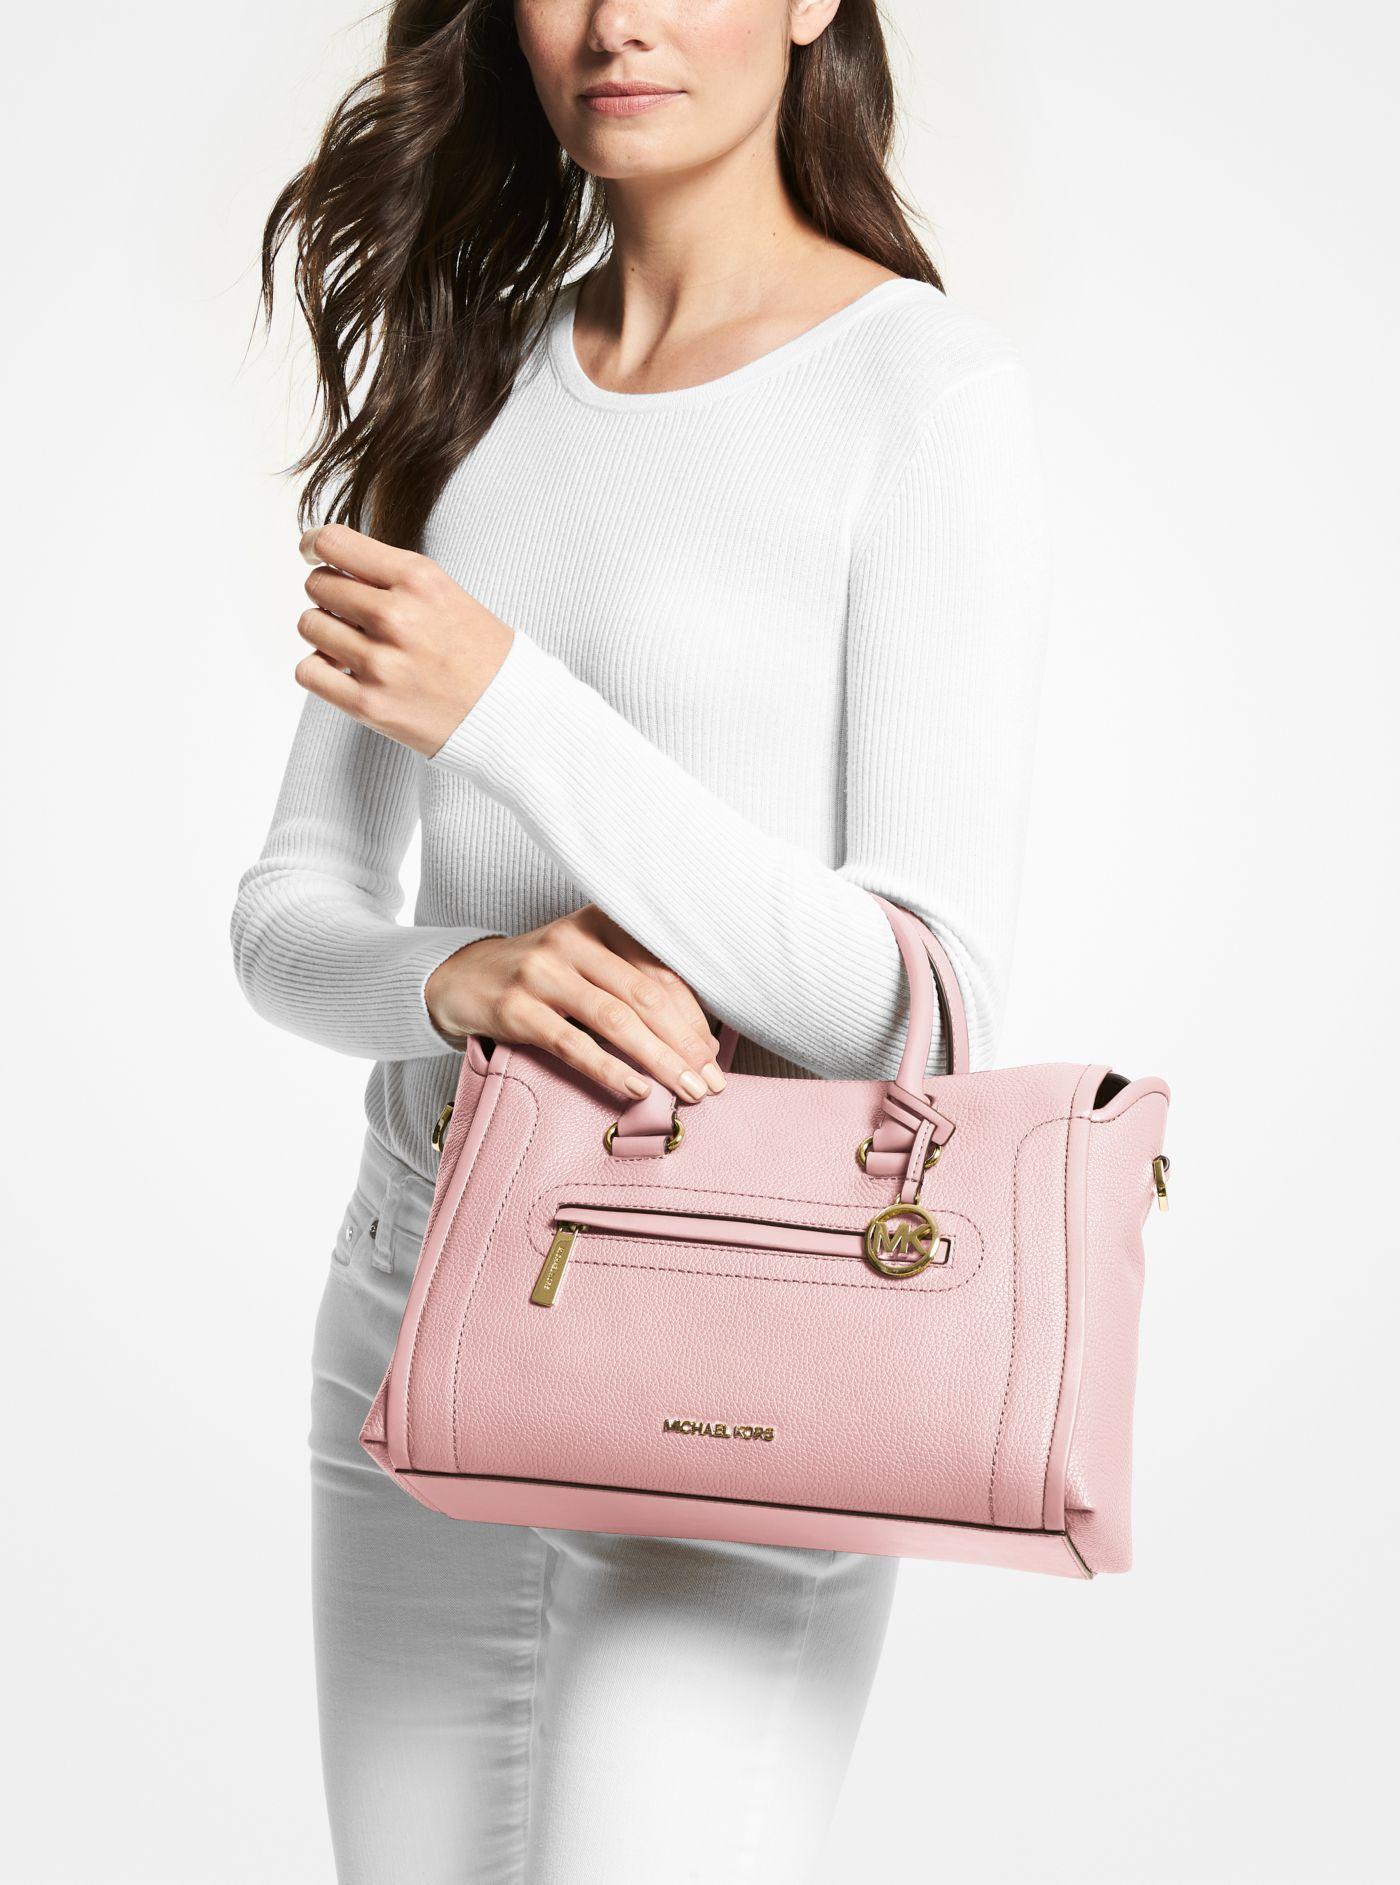 Michael Kors Carine Large Pebbled Leather Satchel in Pink | Lyst